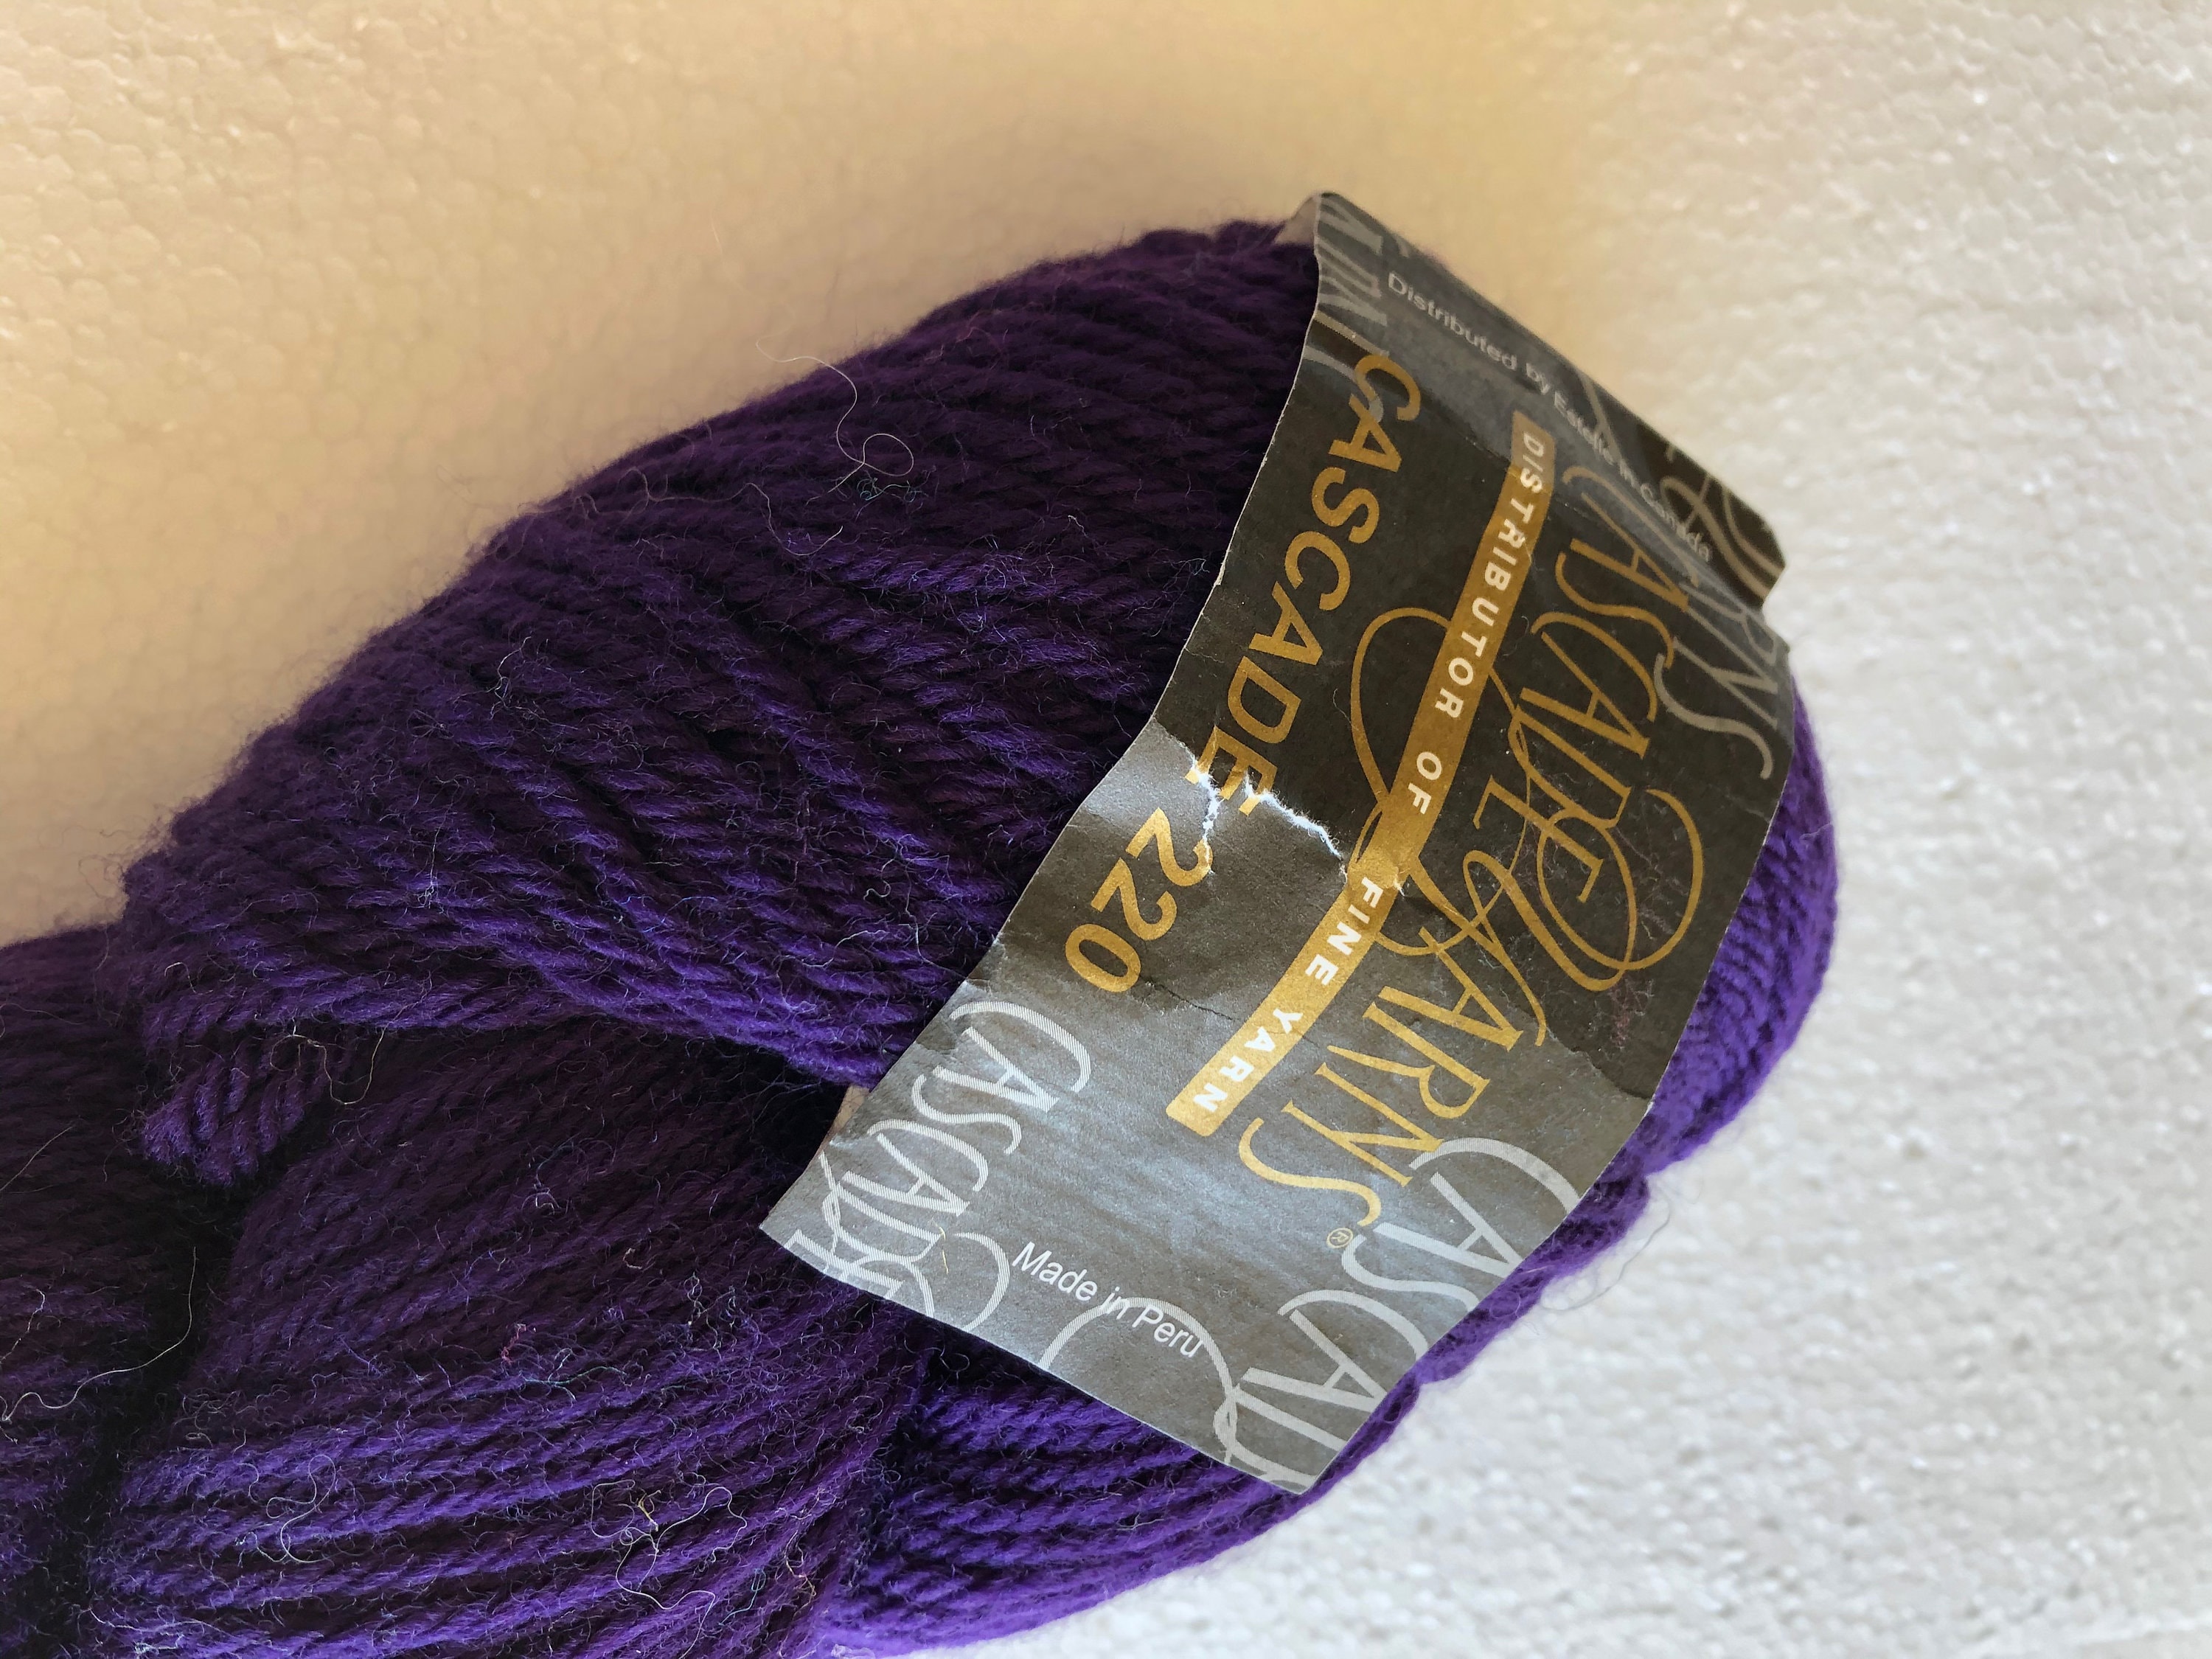 Sugar and Cream Cotton Yarn in Moondance Ombre Color, Variegated Purple,  Blue and White Cotton Yarn 